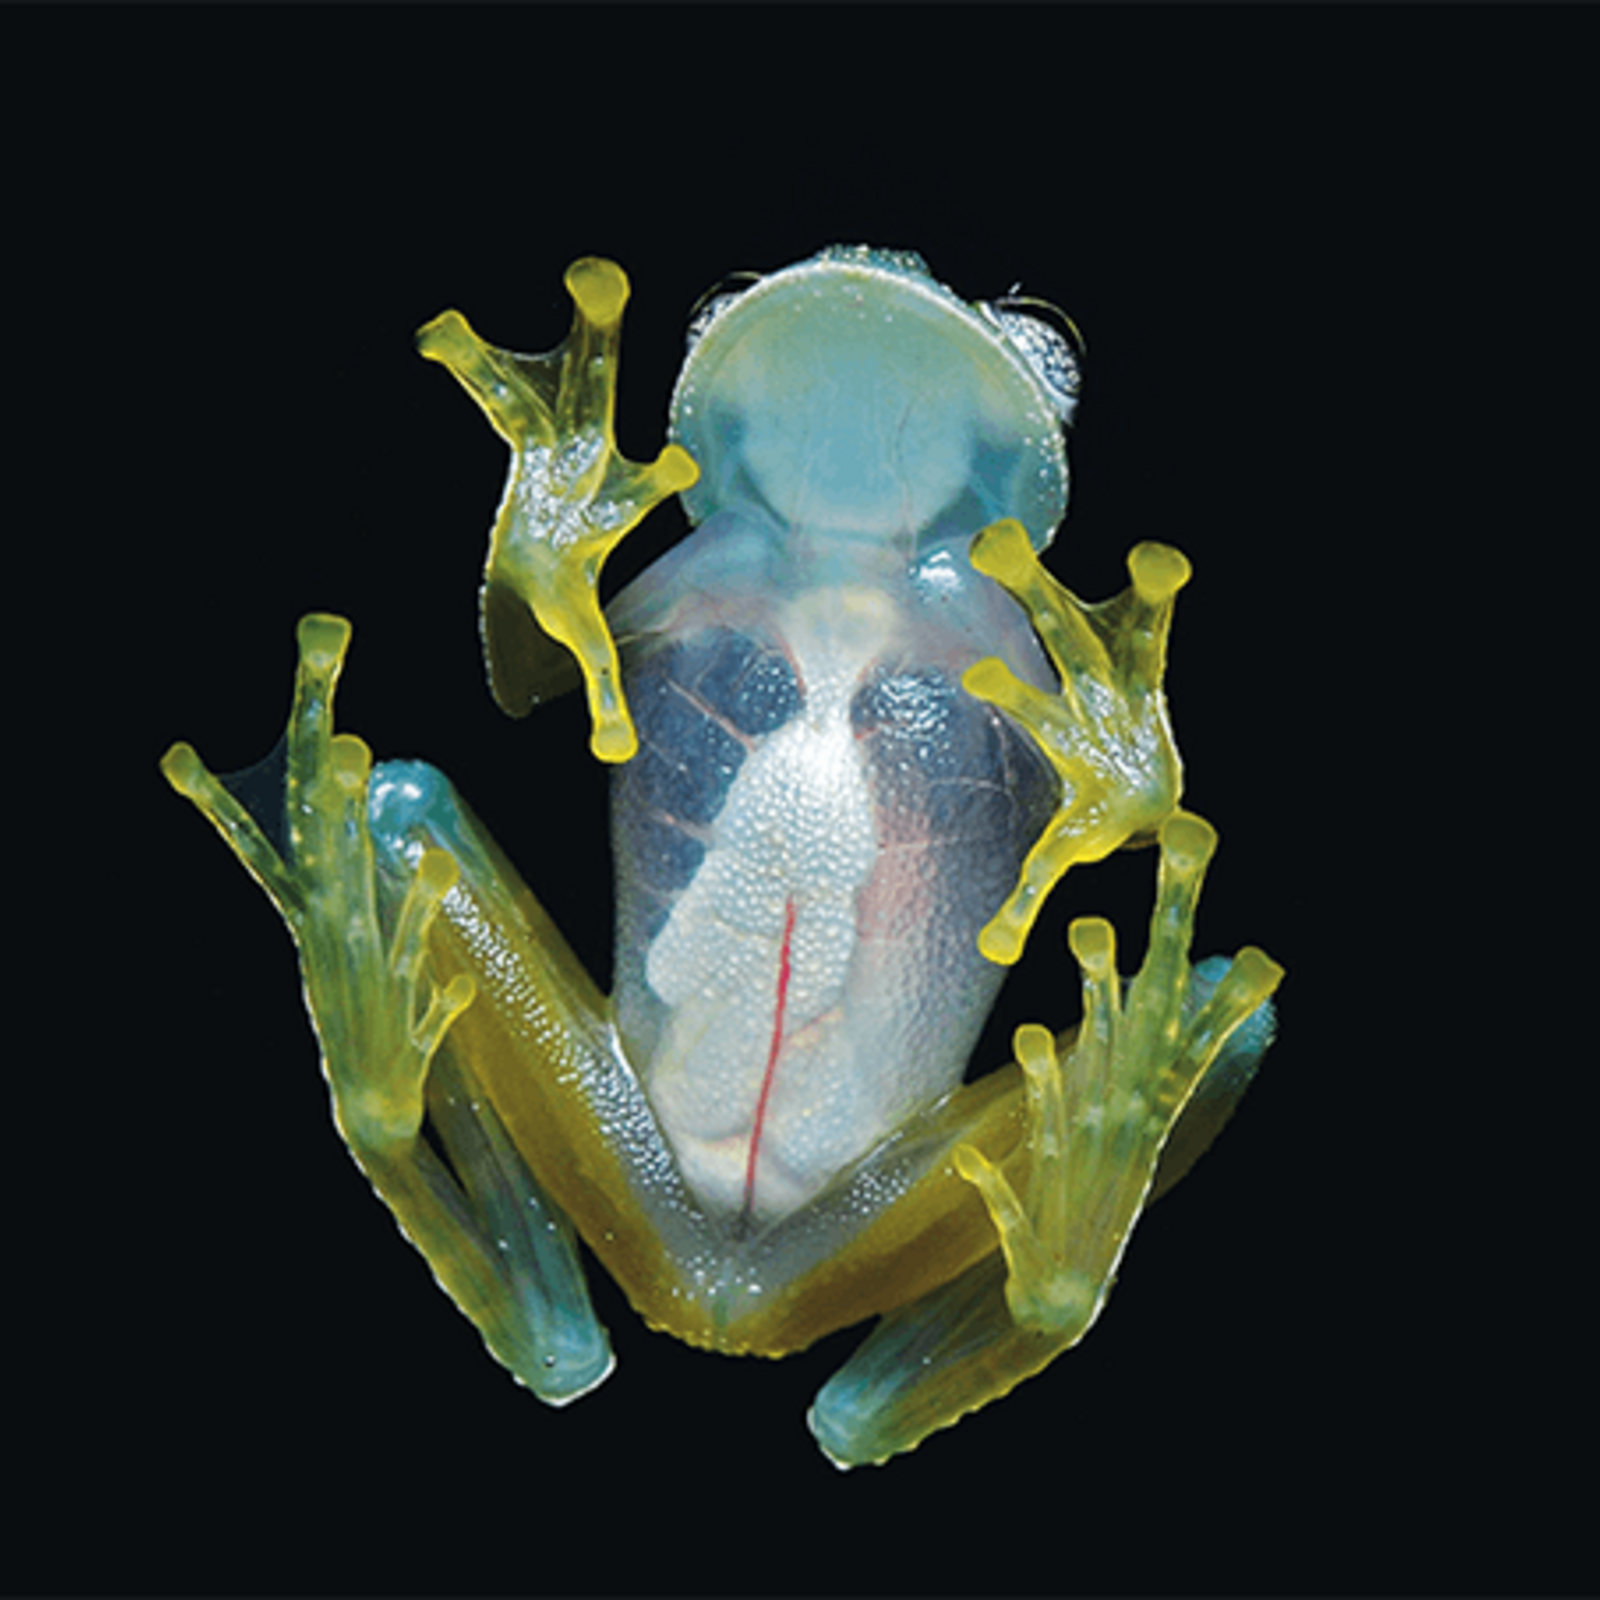 Could the glass frog help spawn a new anticoagulant?